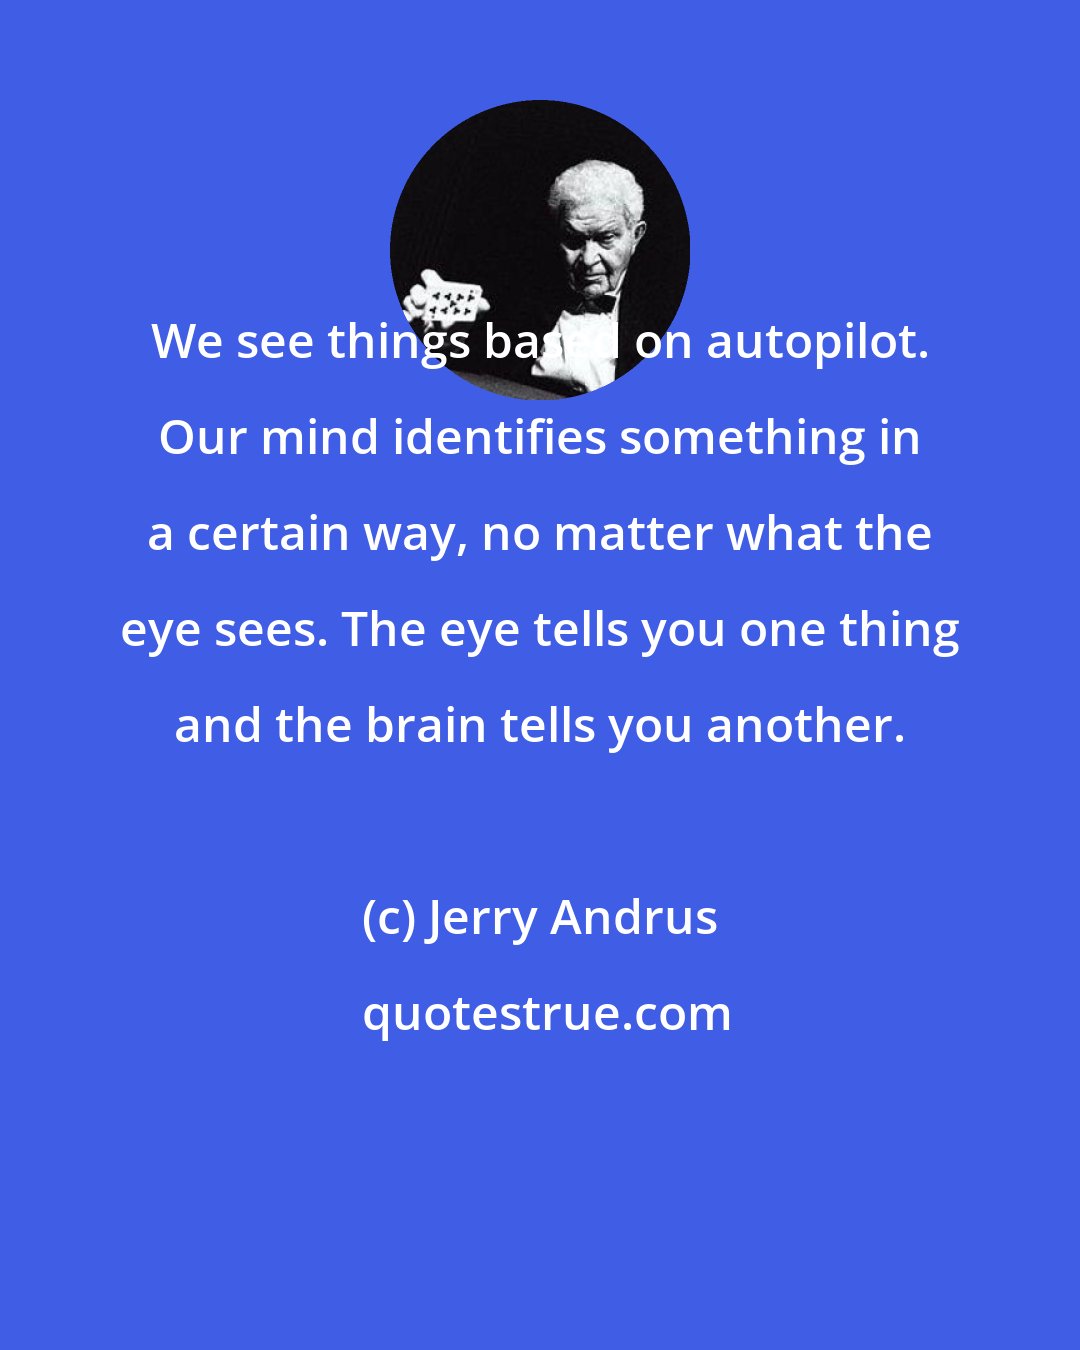 Jerry Andrus: We see things based on autopilot. Our mind identifies something in a certain way, no matter what the eye sees. The eye tells you one thing and the brain tells you another.